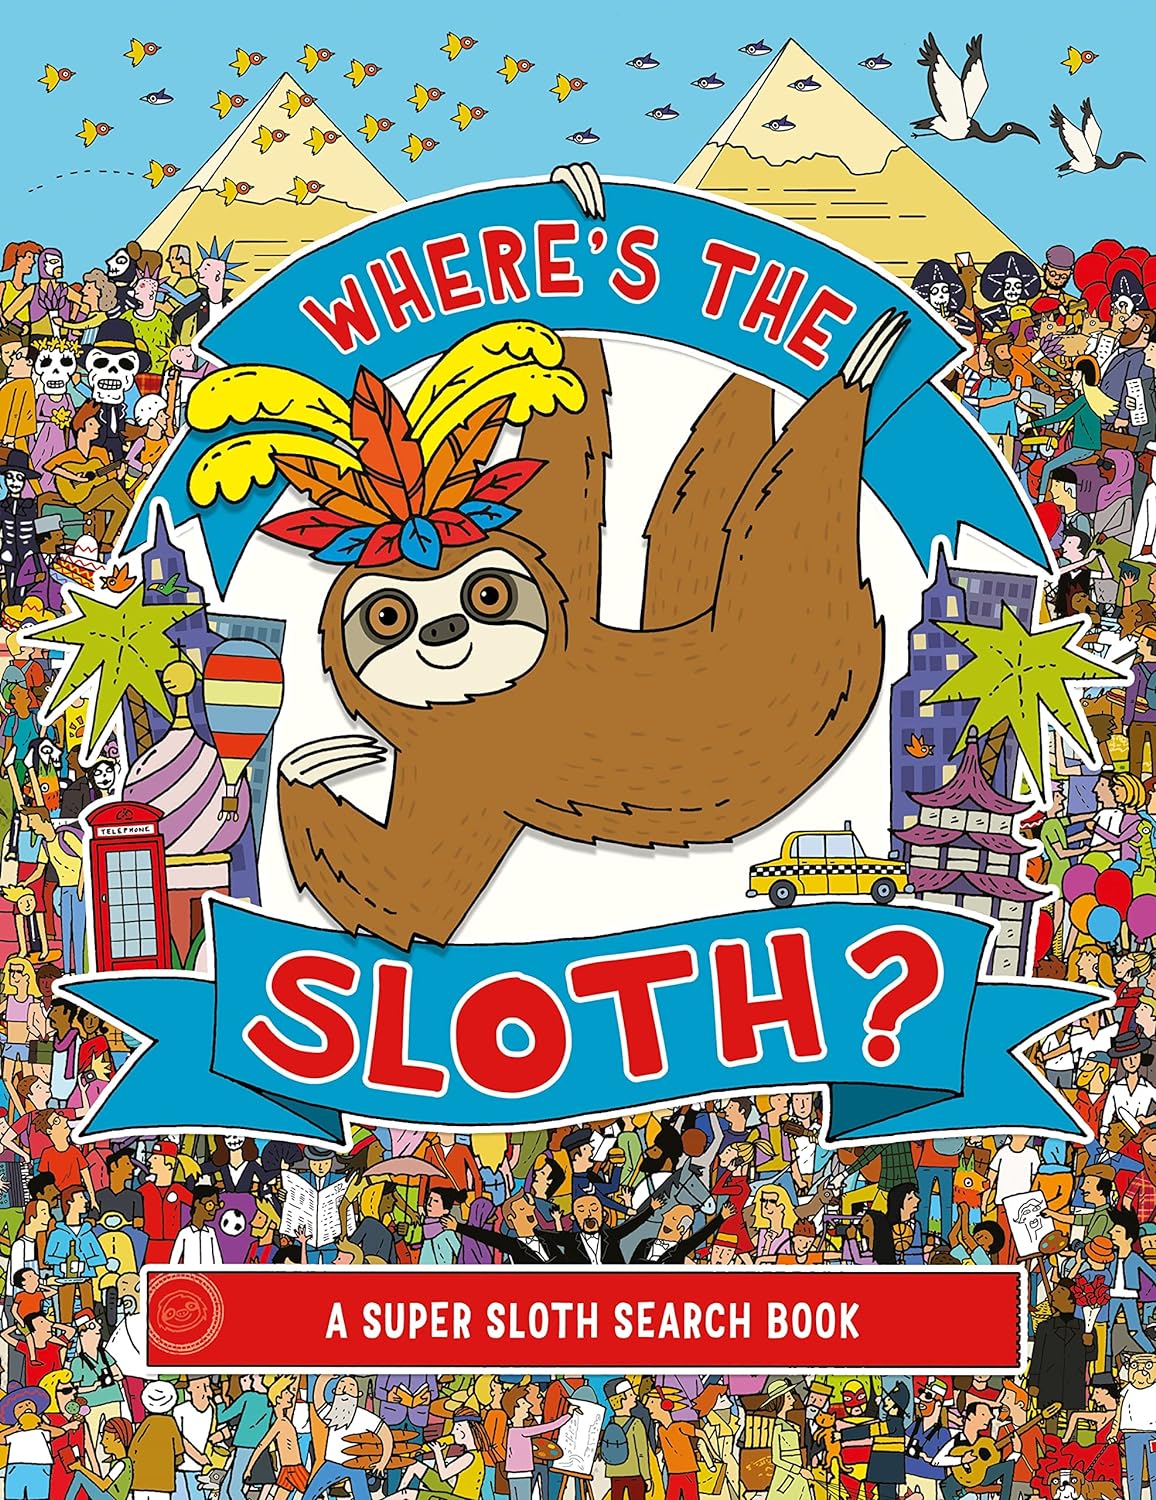 Hurry! Where's the Sloth?: A Super Sloth Search and Find Book - Special Discounts!